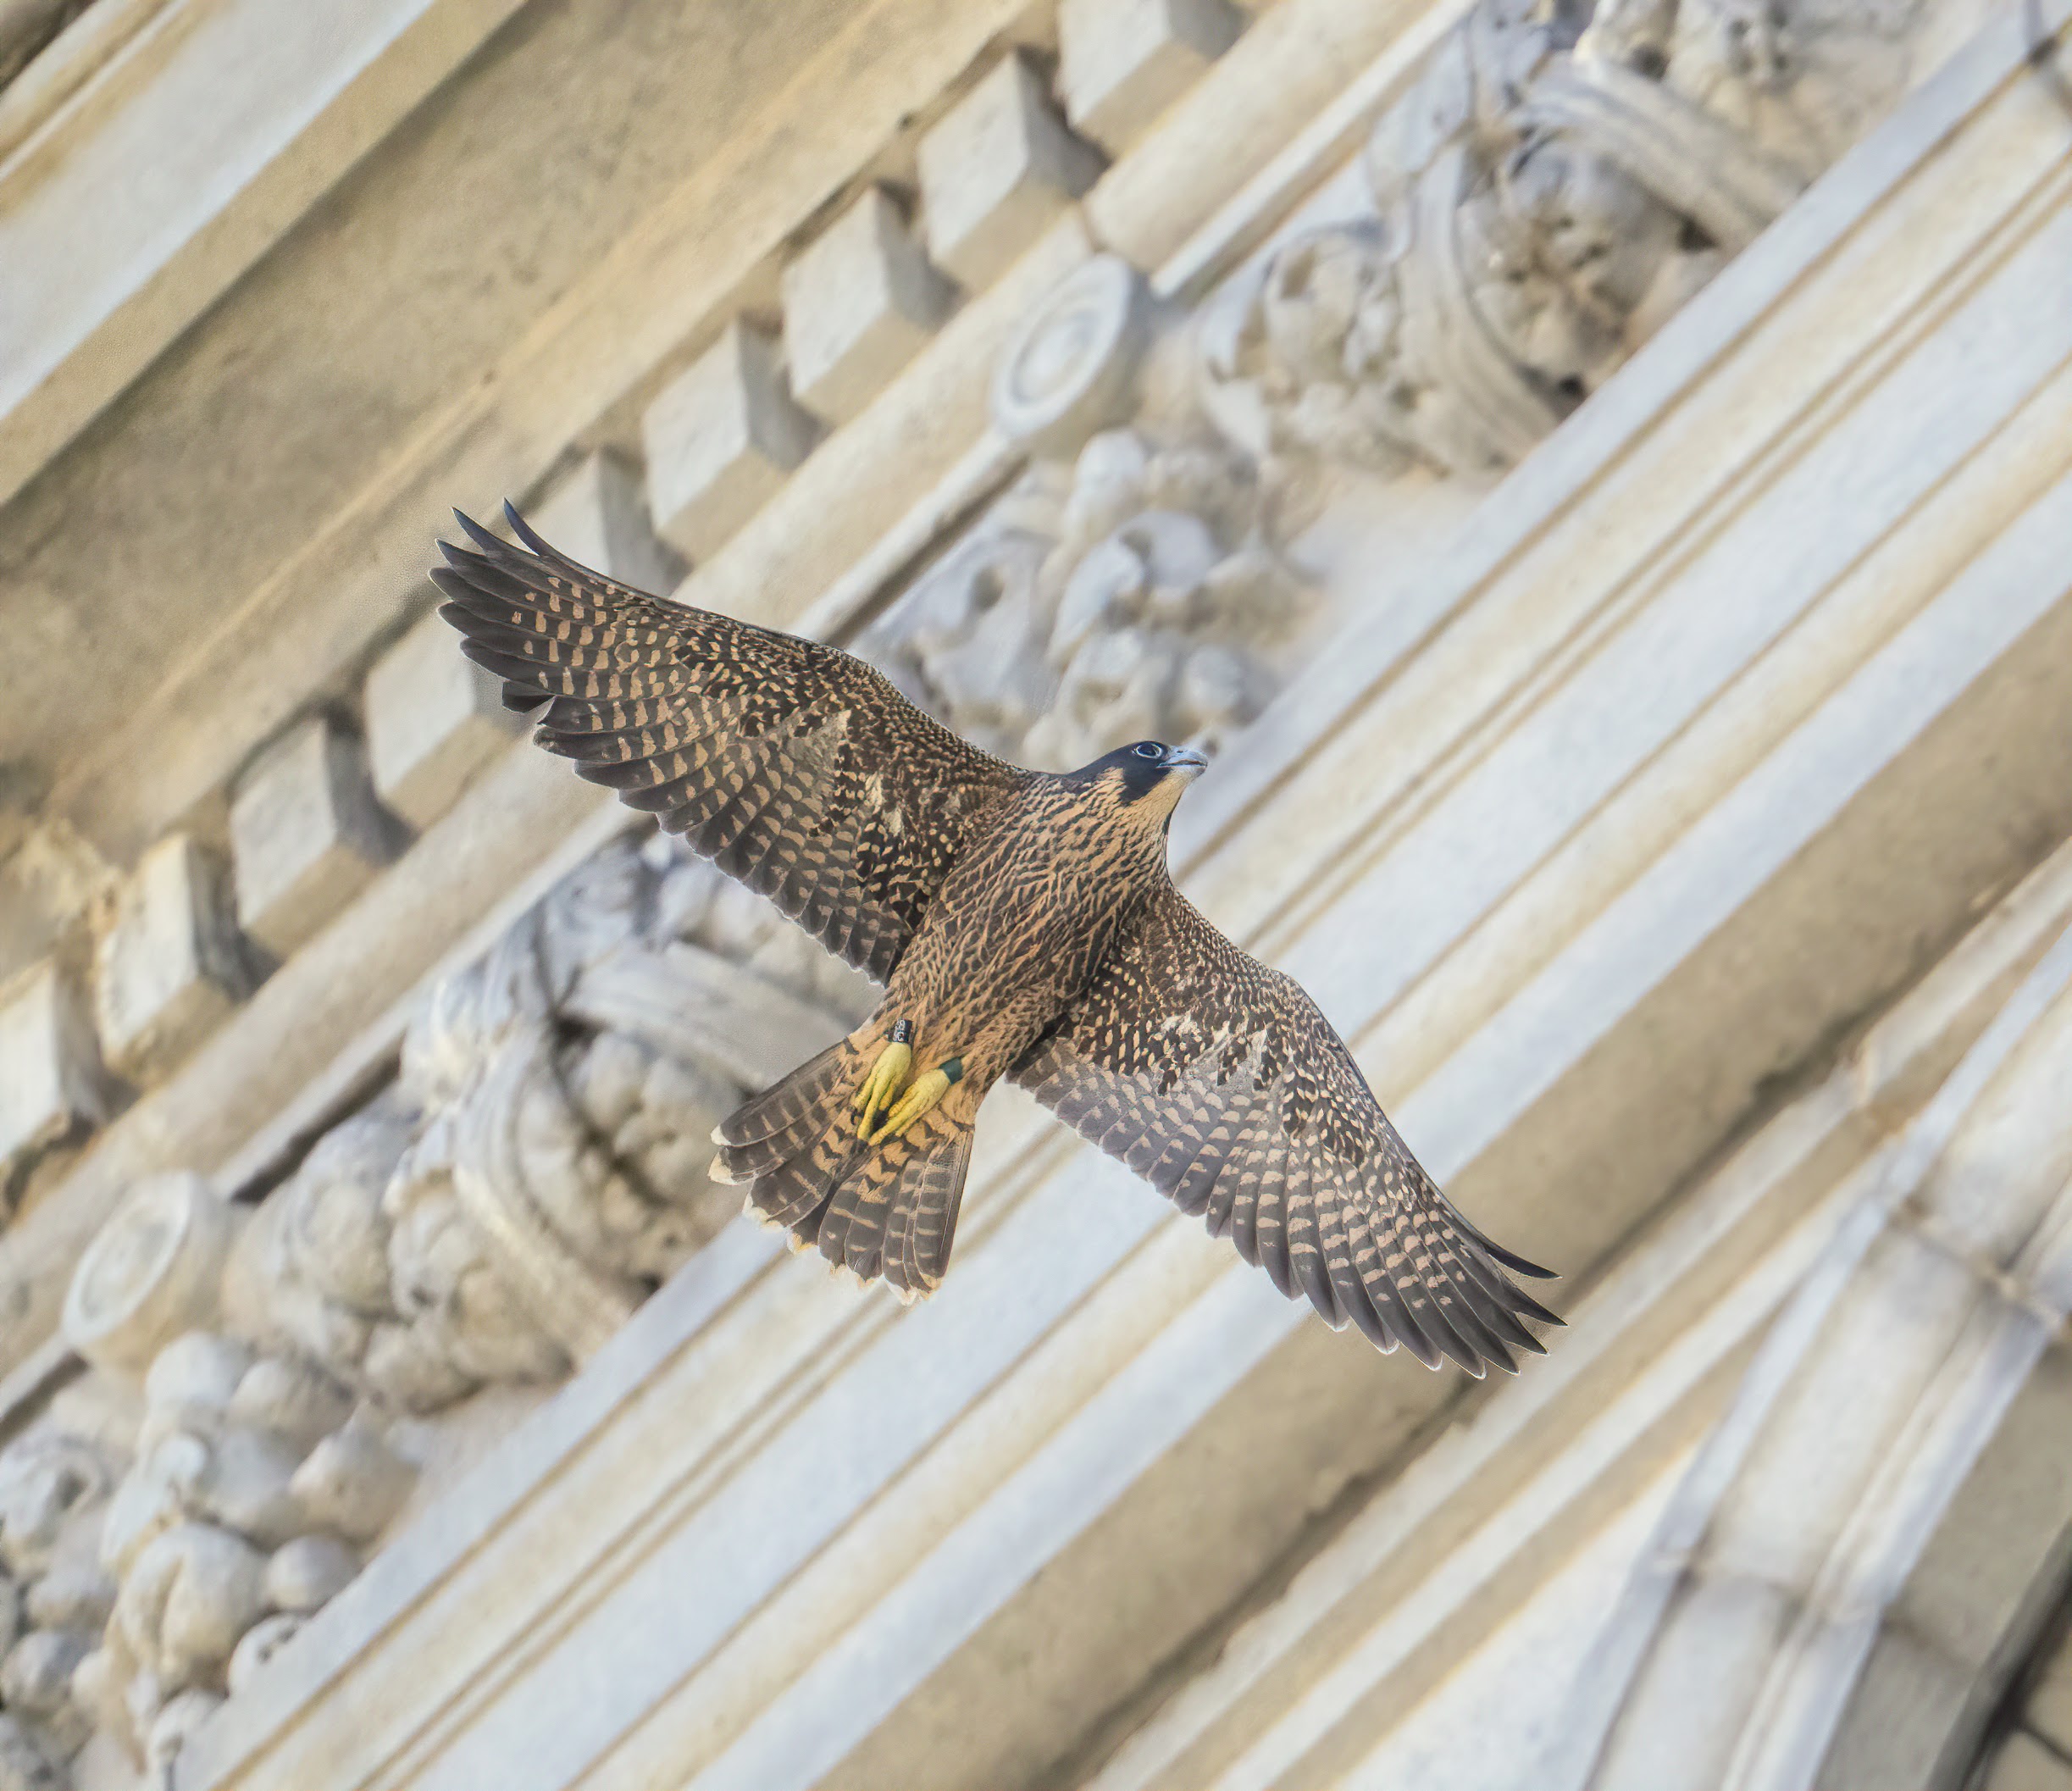 Aurora flies with outspread wings past decorative architectural elements on the Campanile.